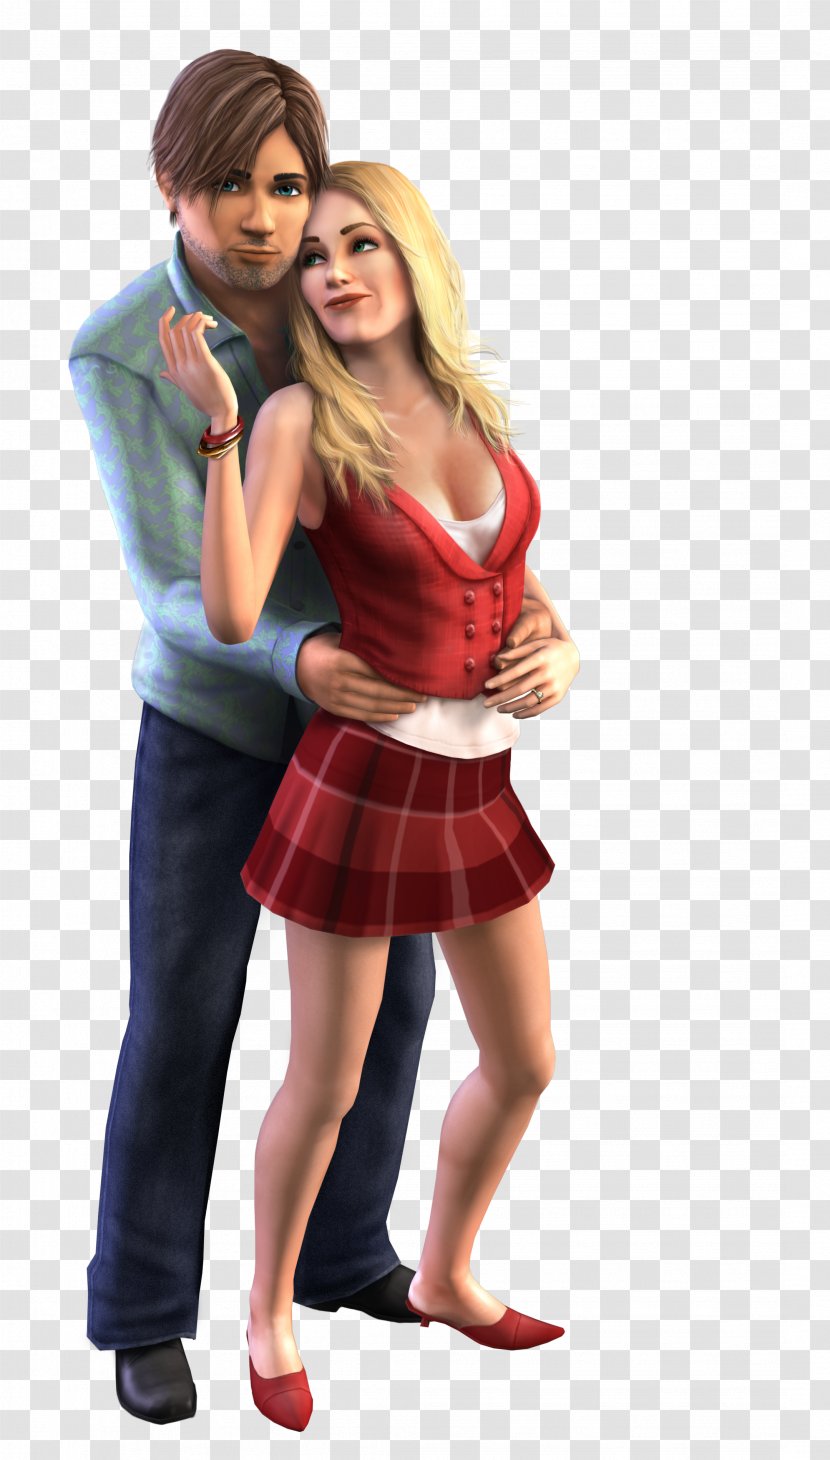 The Sims 3: Ambitions 4 Showtime Online - Cartoon - 3 Logo Transparent PNG